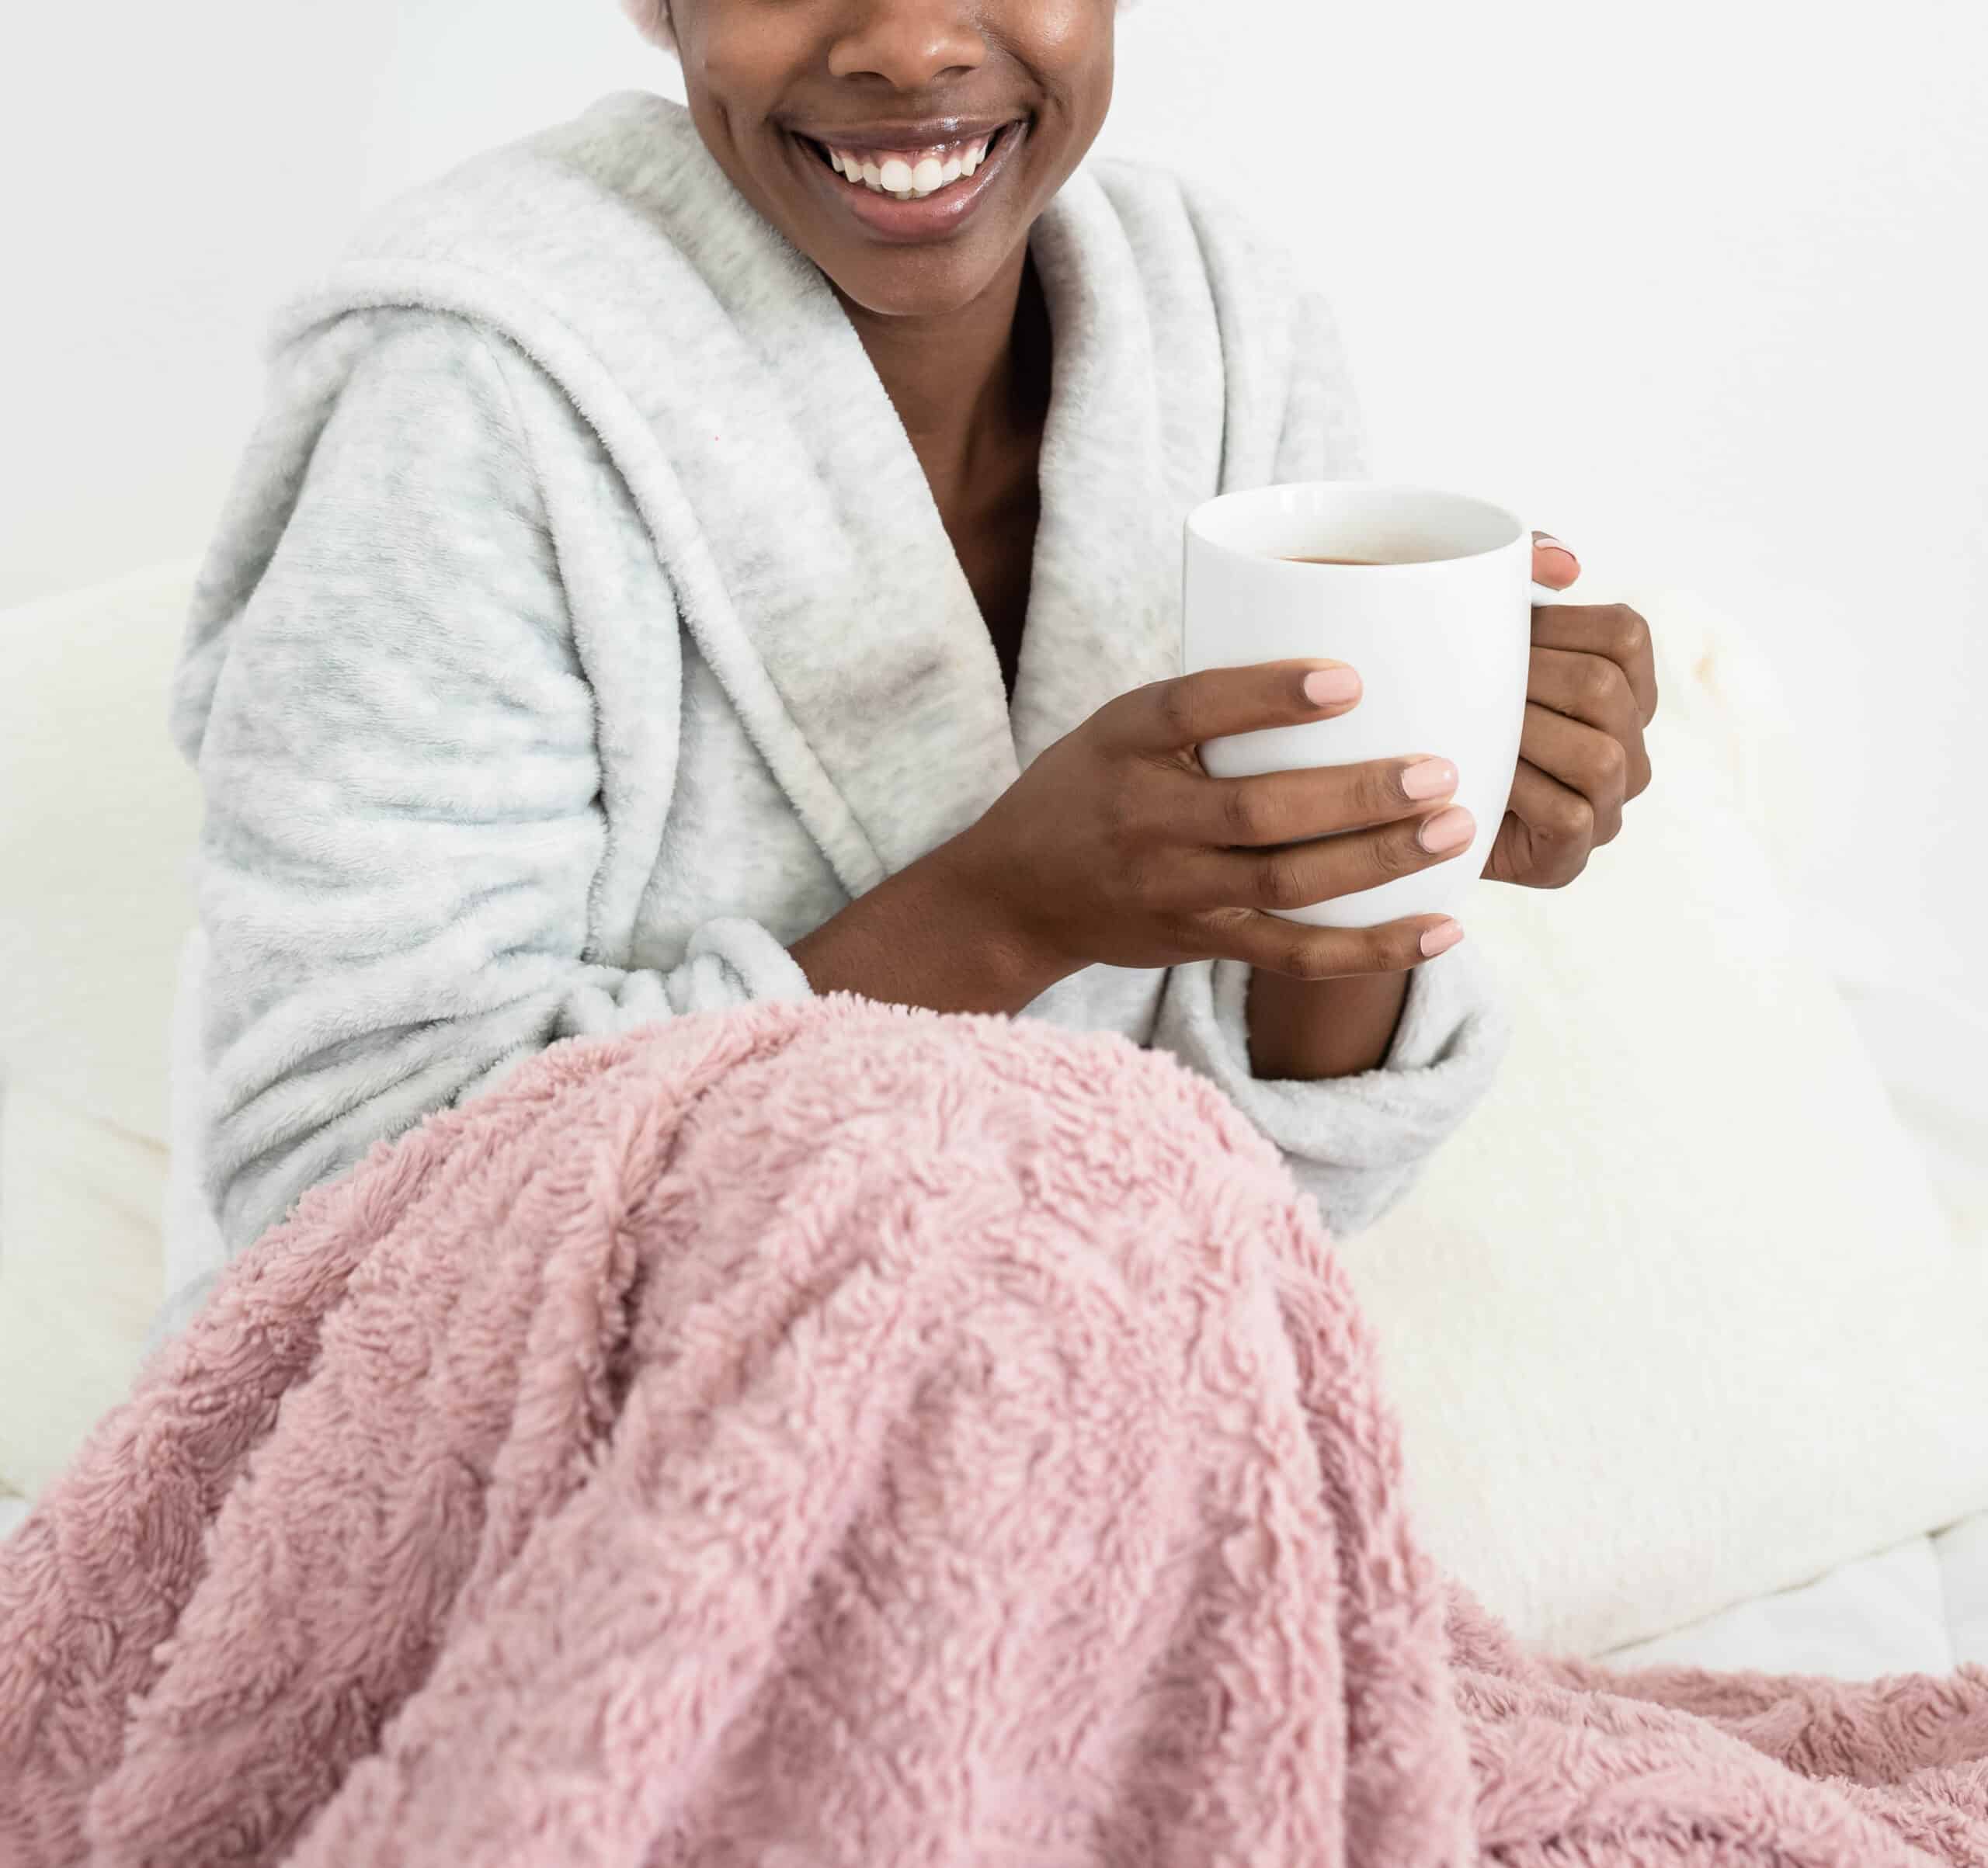 Woman smiling with a mug in her hands and a blanket on her lap